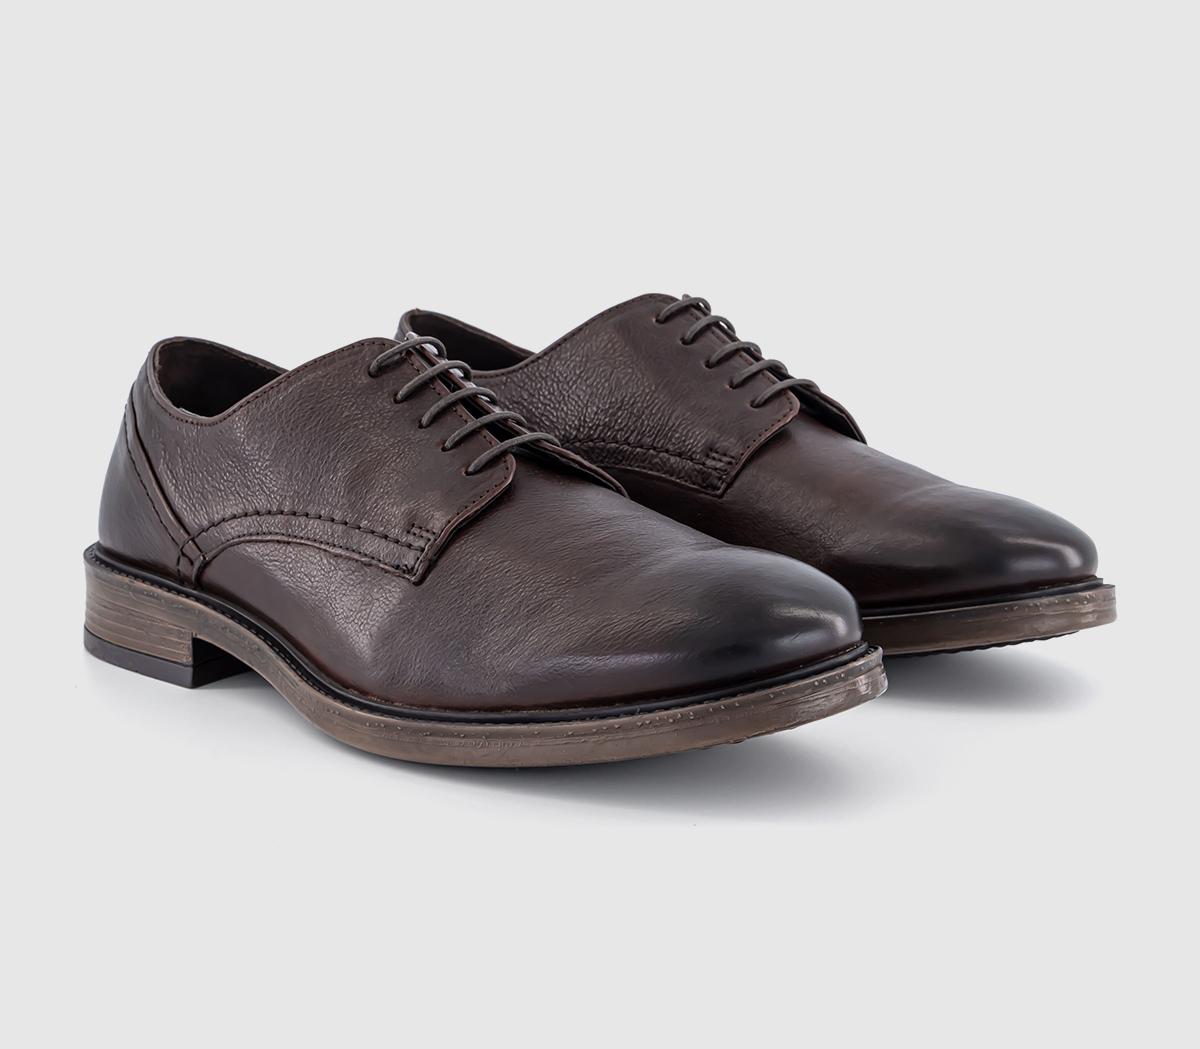 OFFICE Cadeleigh Casual Leather Derby Shoes Brown, 6